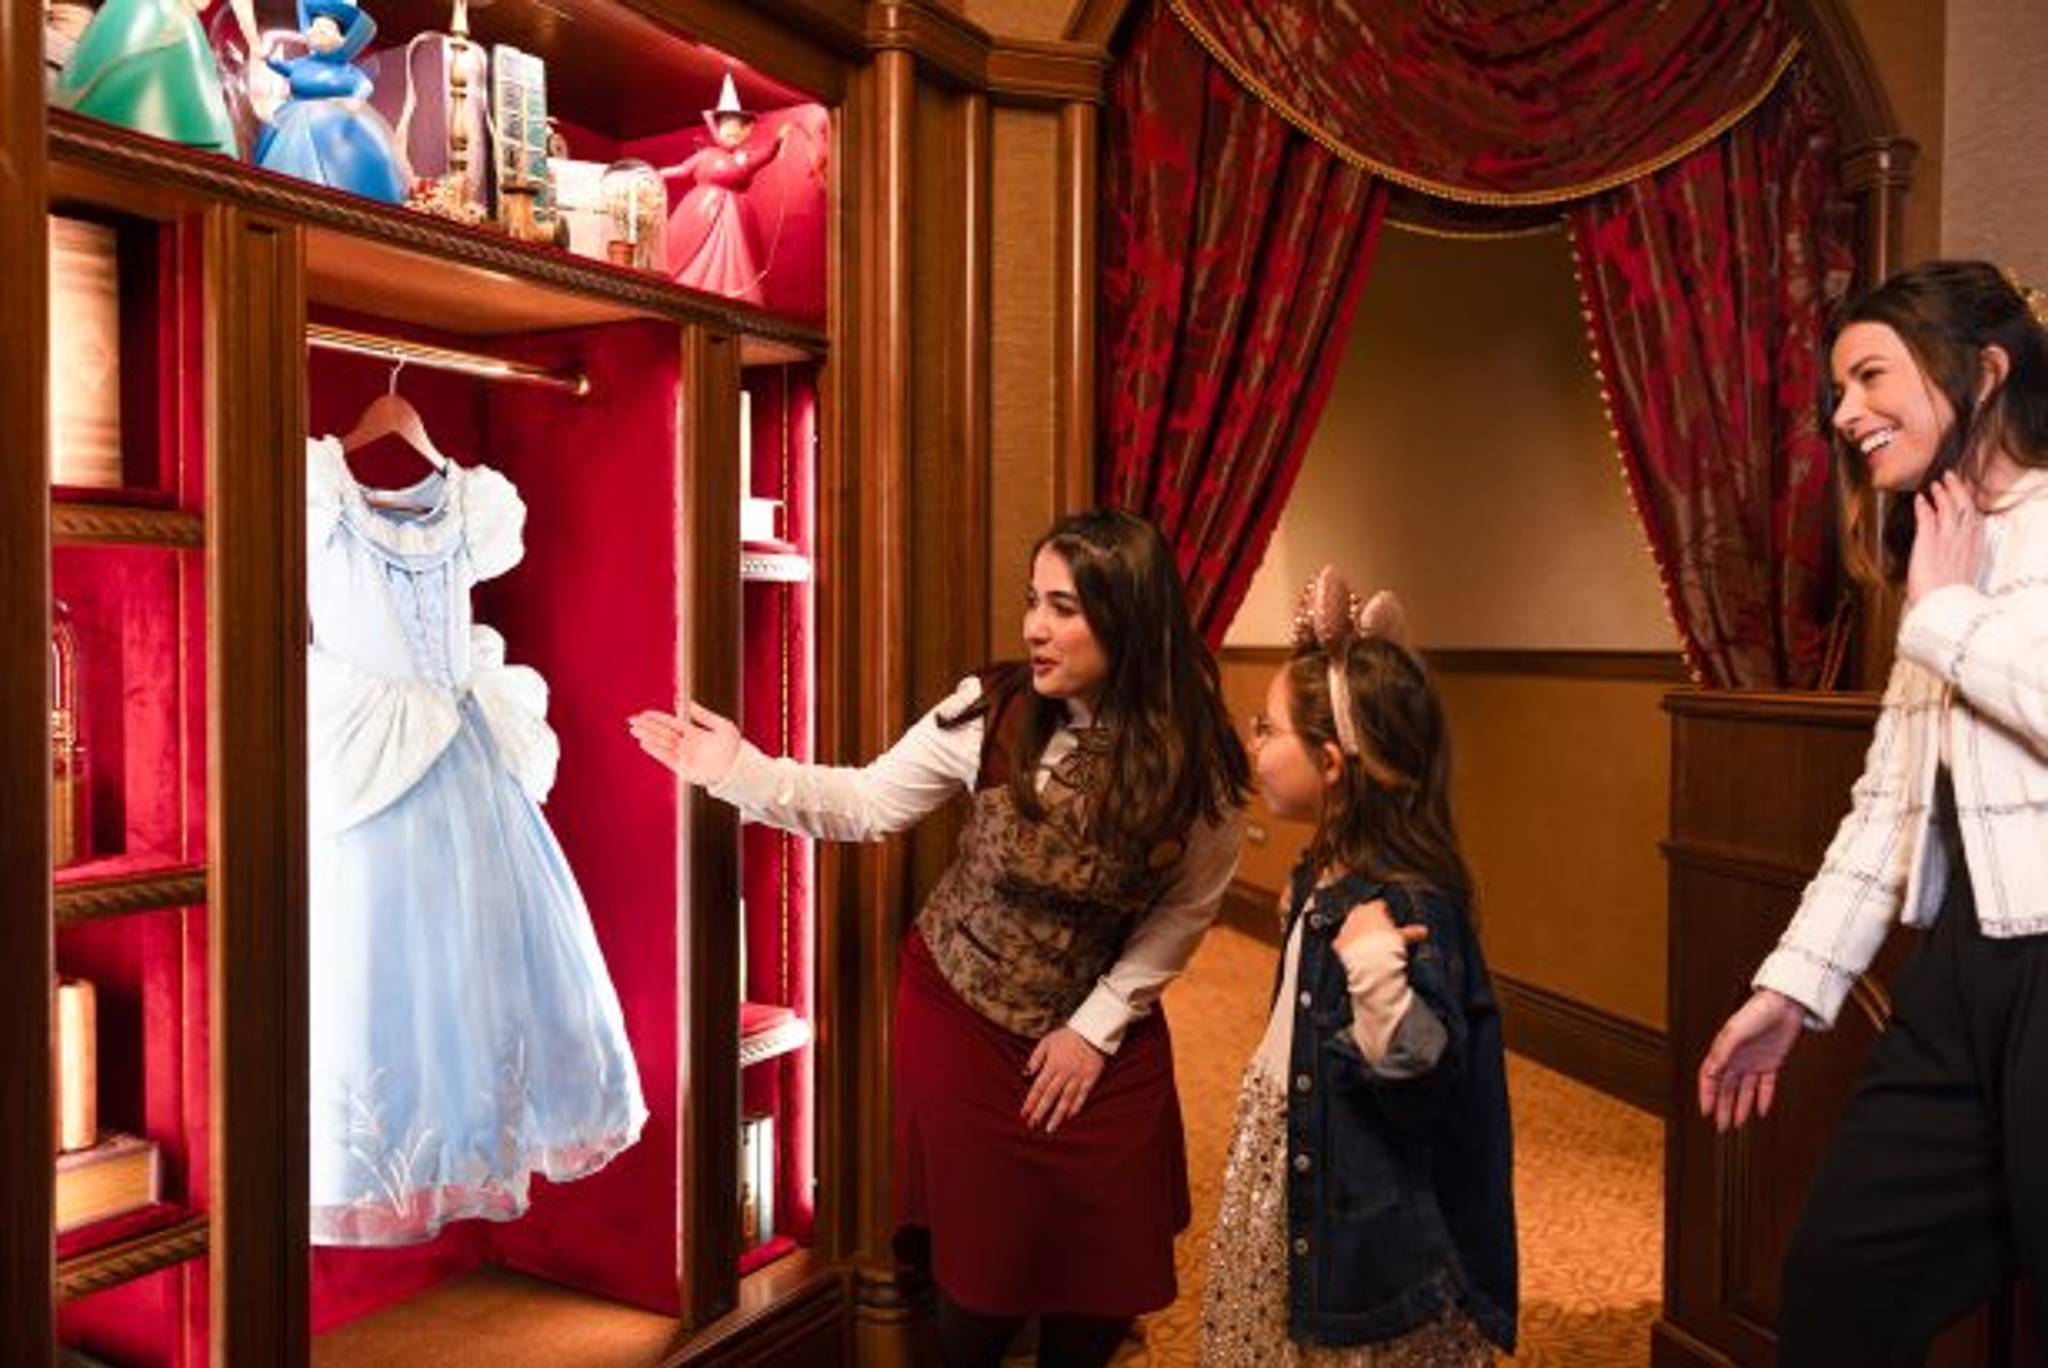 Disneyland Hotel offers fans an immersive royal stay